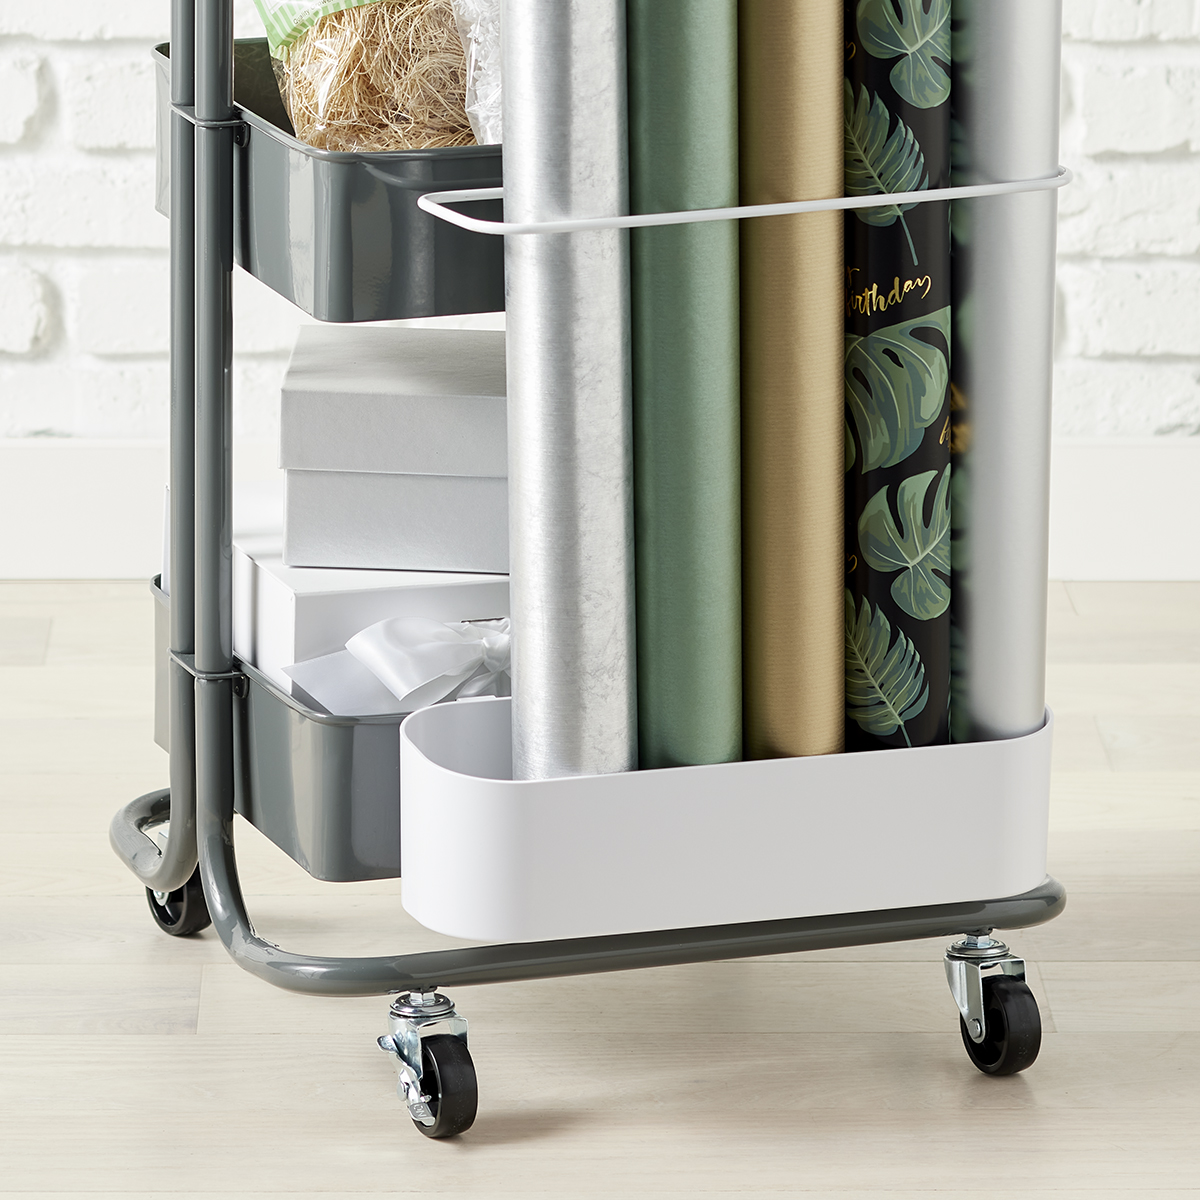 Wrapping Cart in Utility - Crate and Barrel